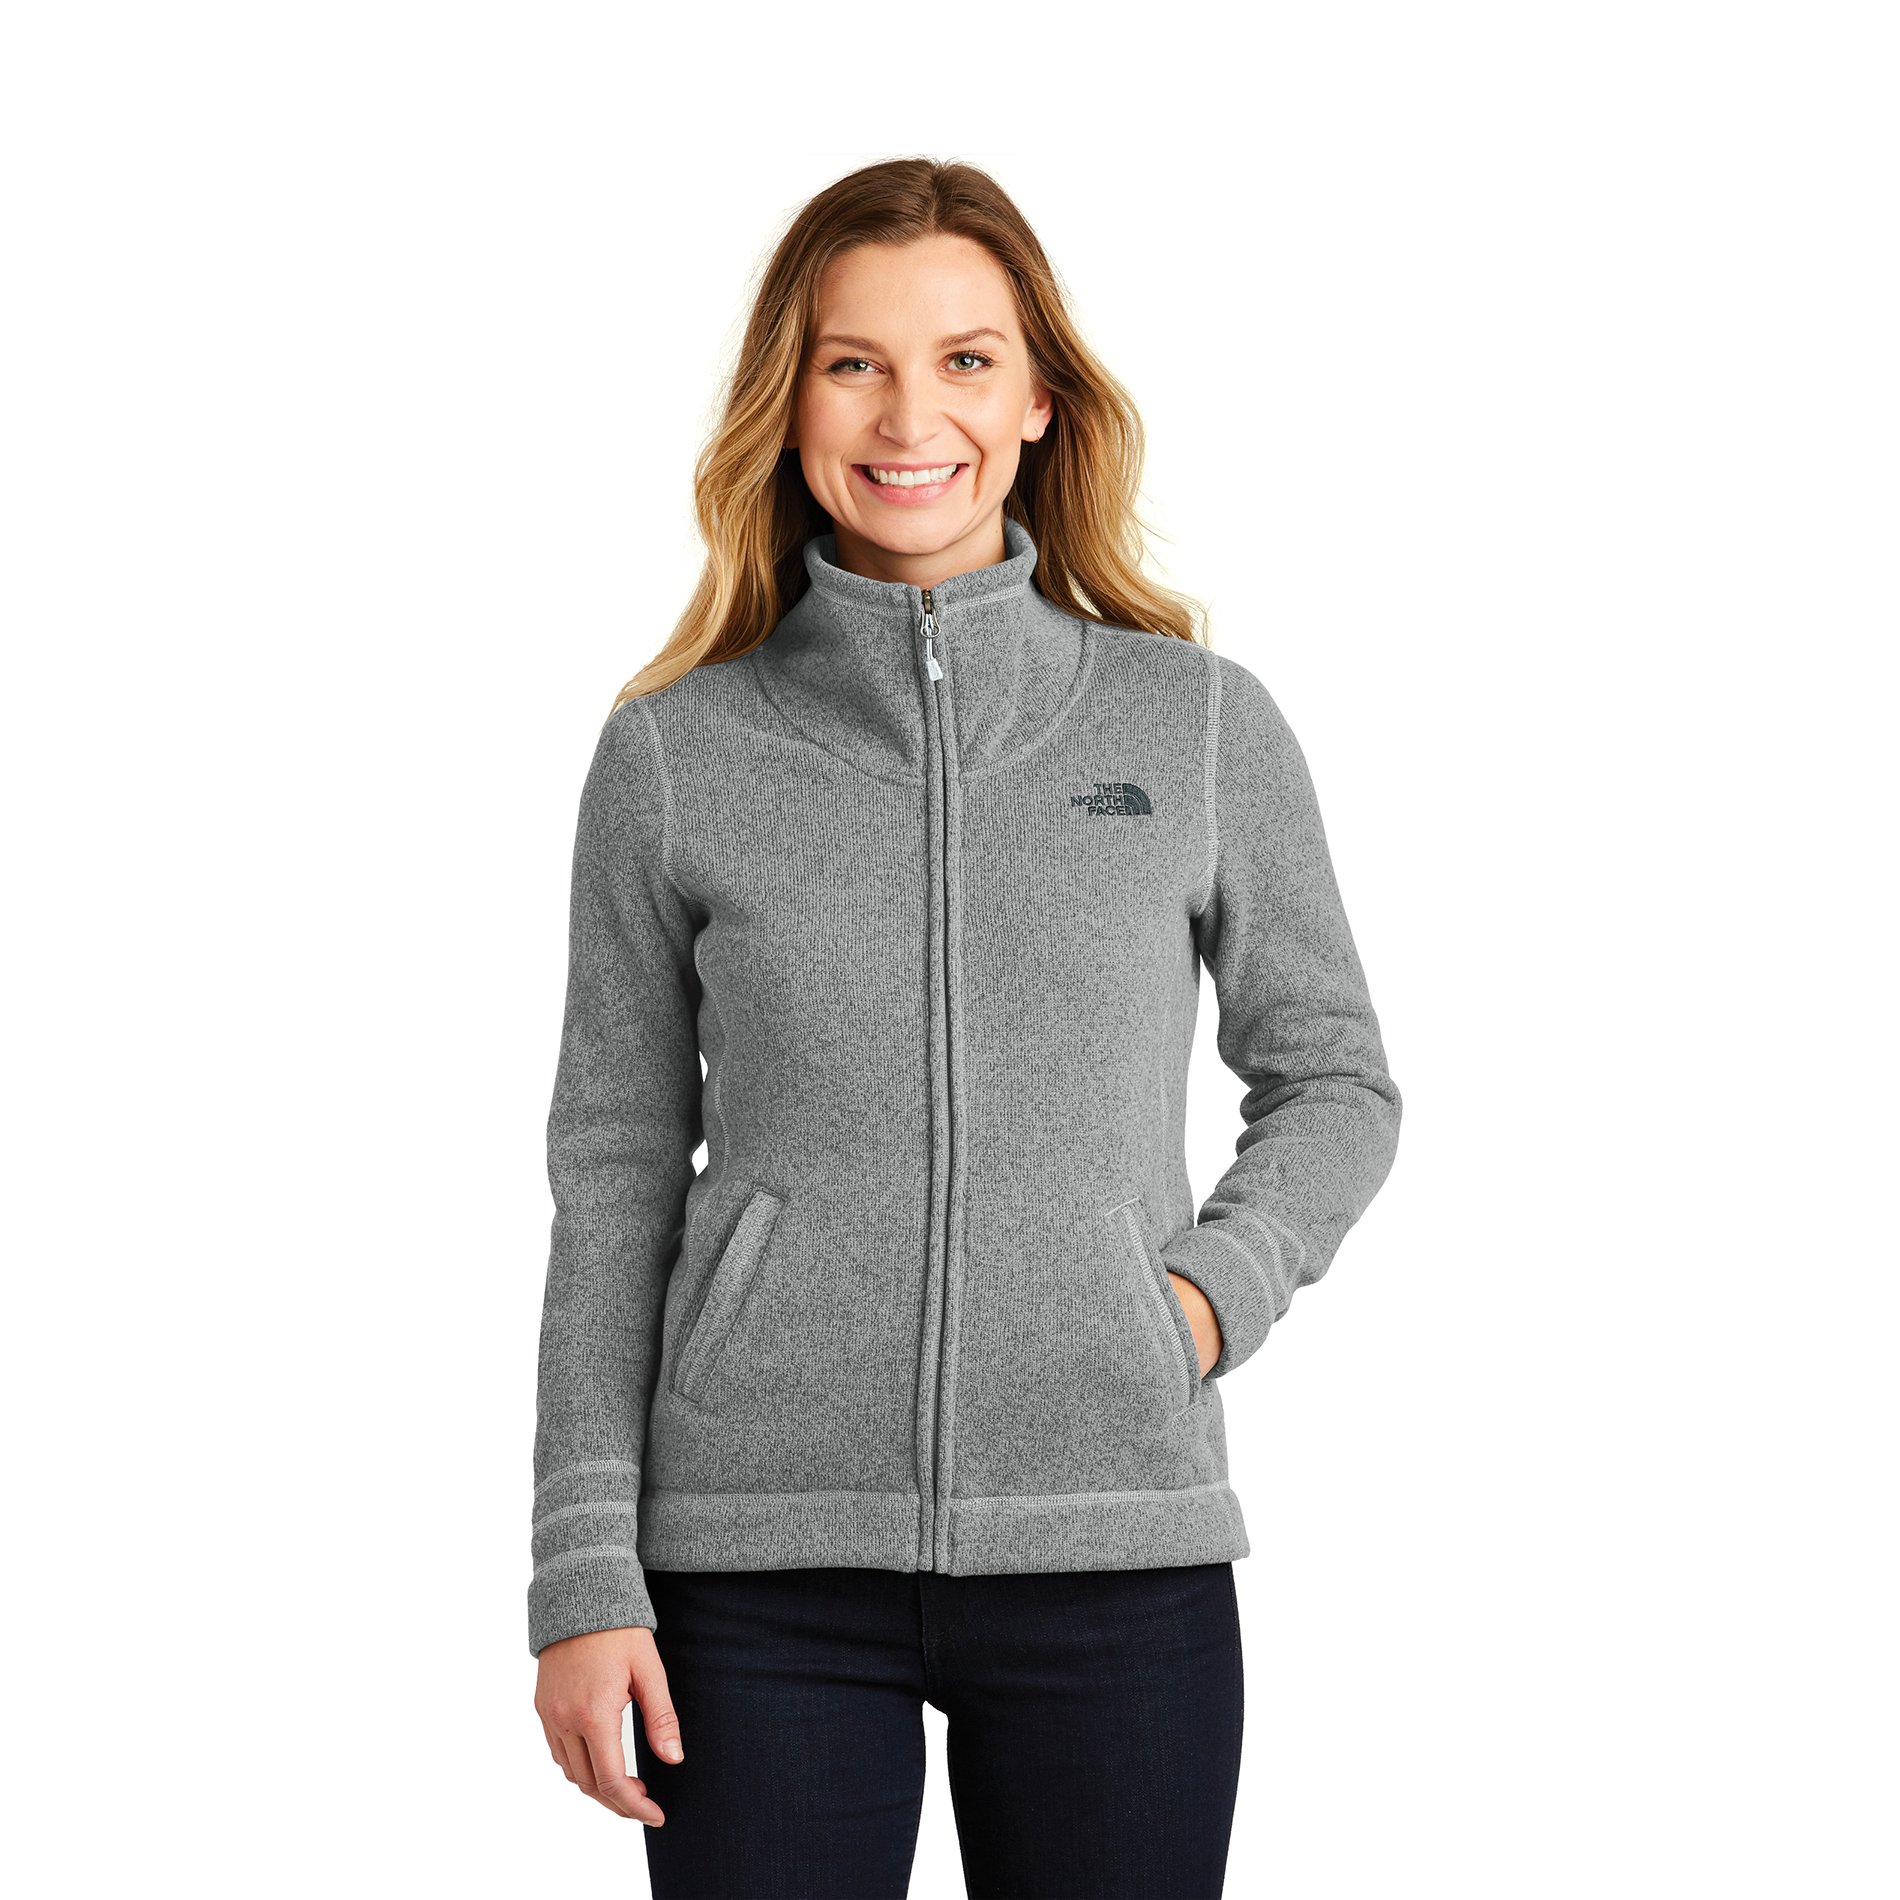 https://img.printfection.com/19/18557/dz5hFDk8154FksM/The+North+Face+NF0A3LH8++-+TNF+Medium+Grey+Heather+%28Front2%29.png